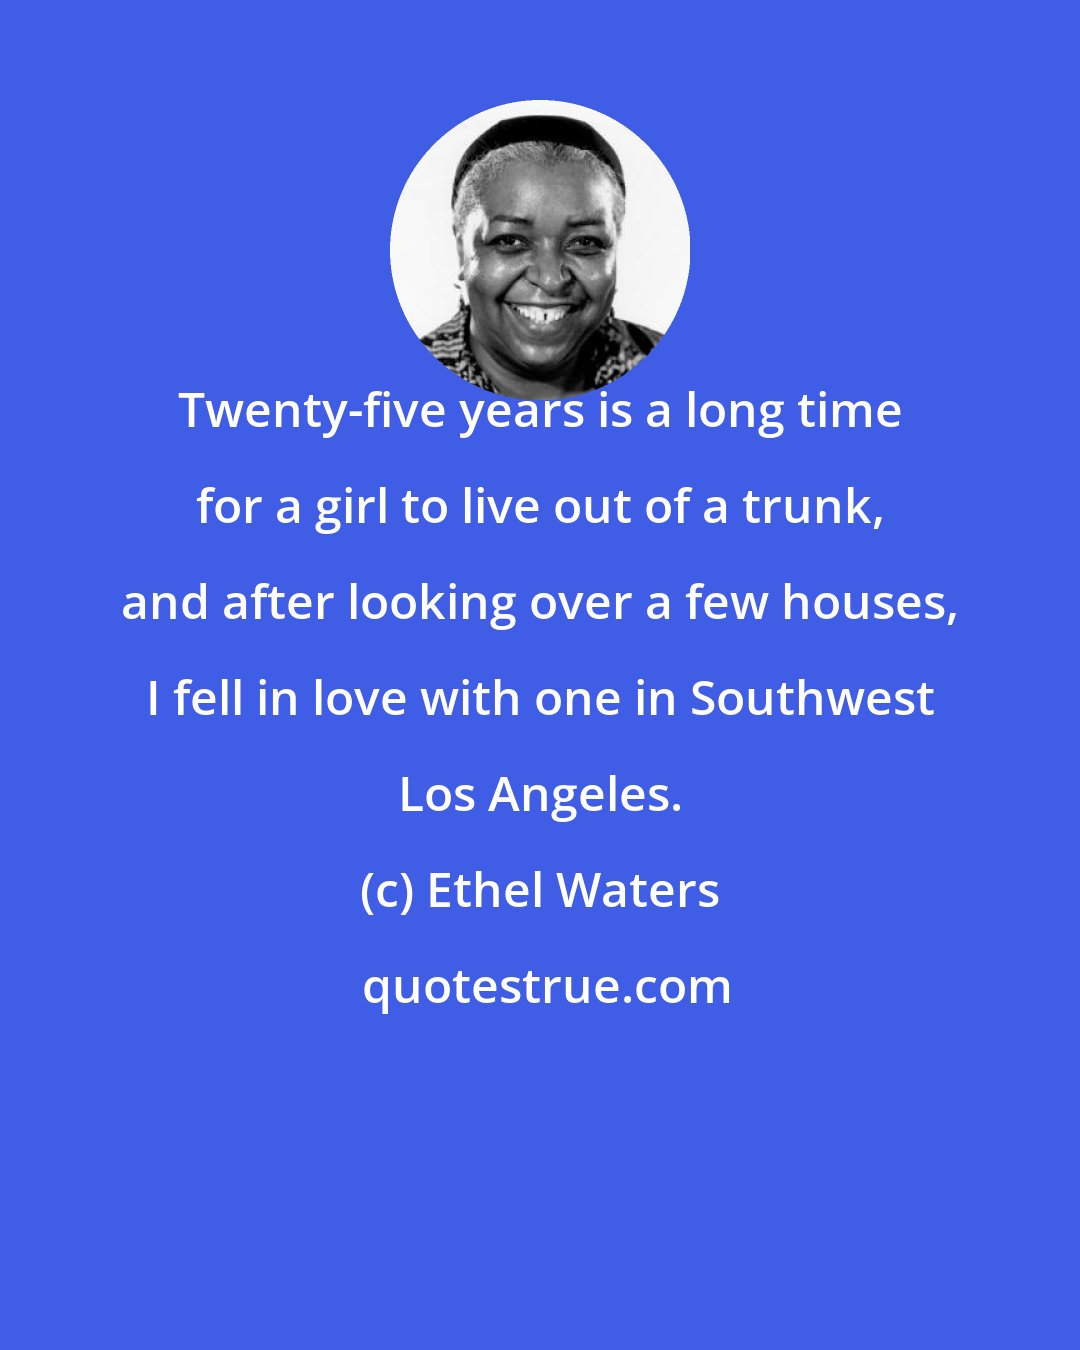 Ethel Waters: Twenty-five years is a long time for a girl to live out of a trunk, and after looking over a few houses, I fell in love with one in Southwest Los Angeles.